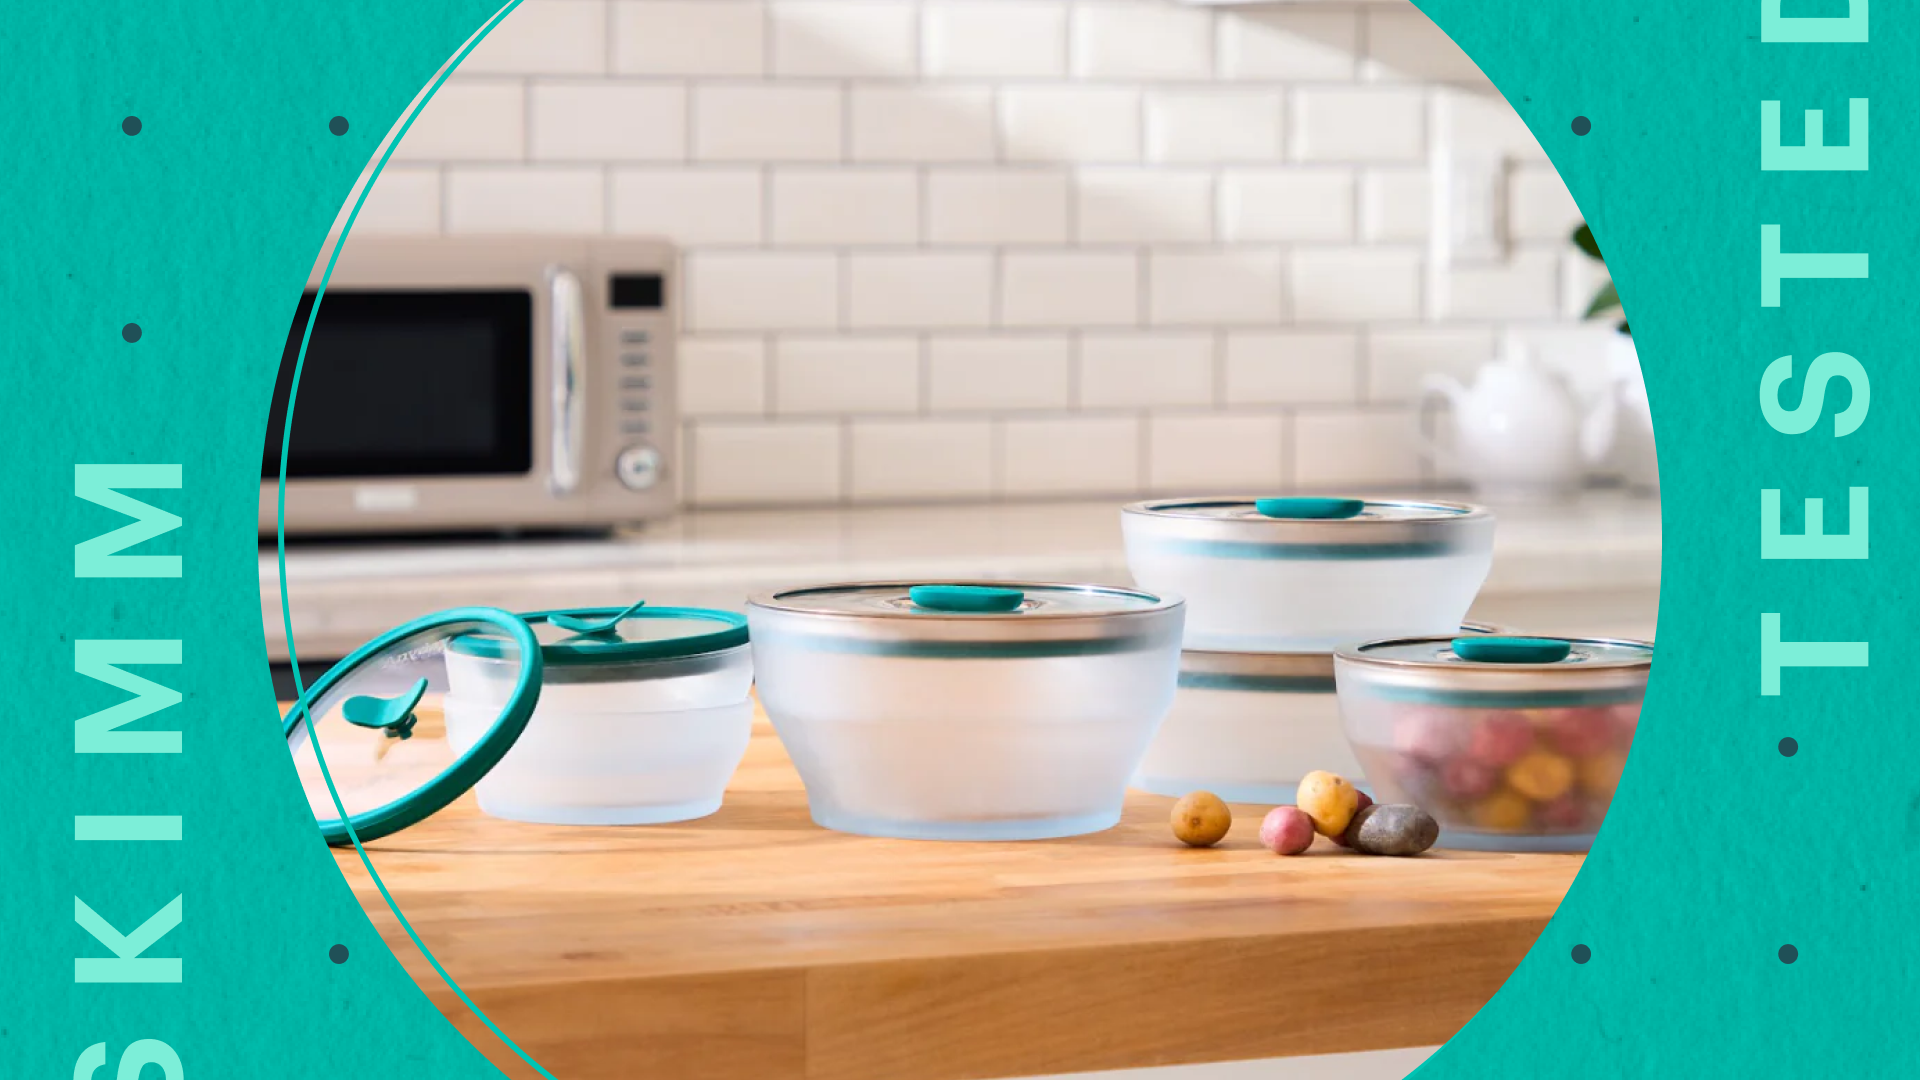 Anyday Microwave Cookware Everyday Set